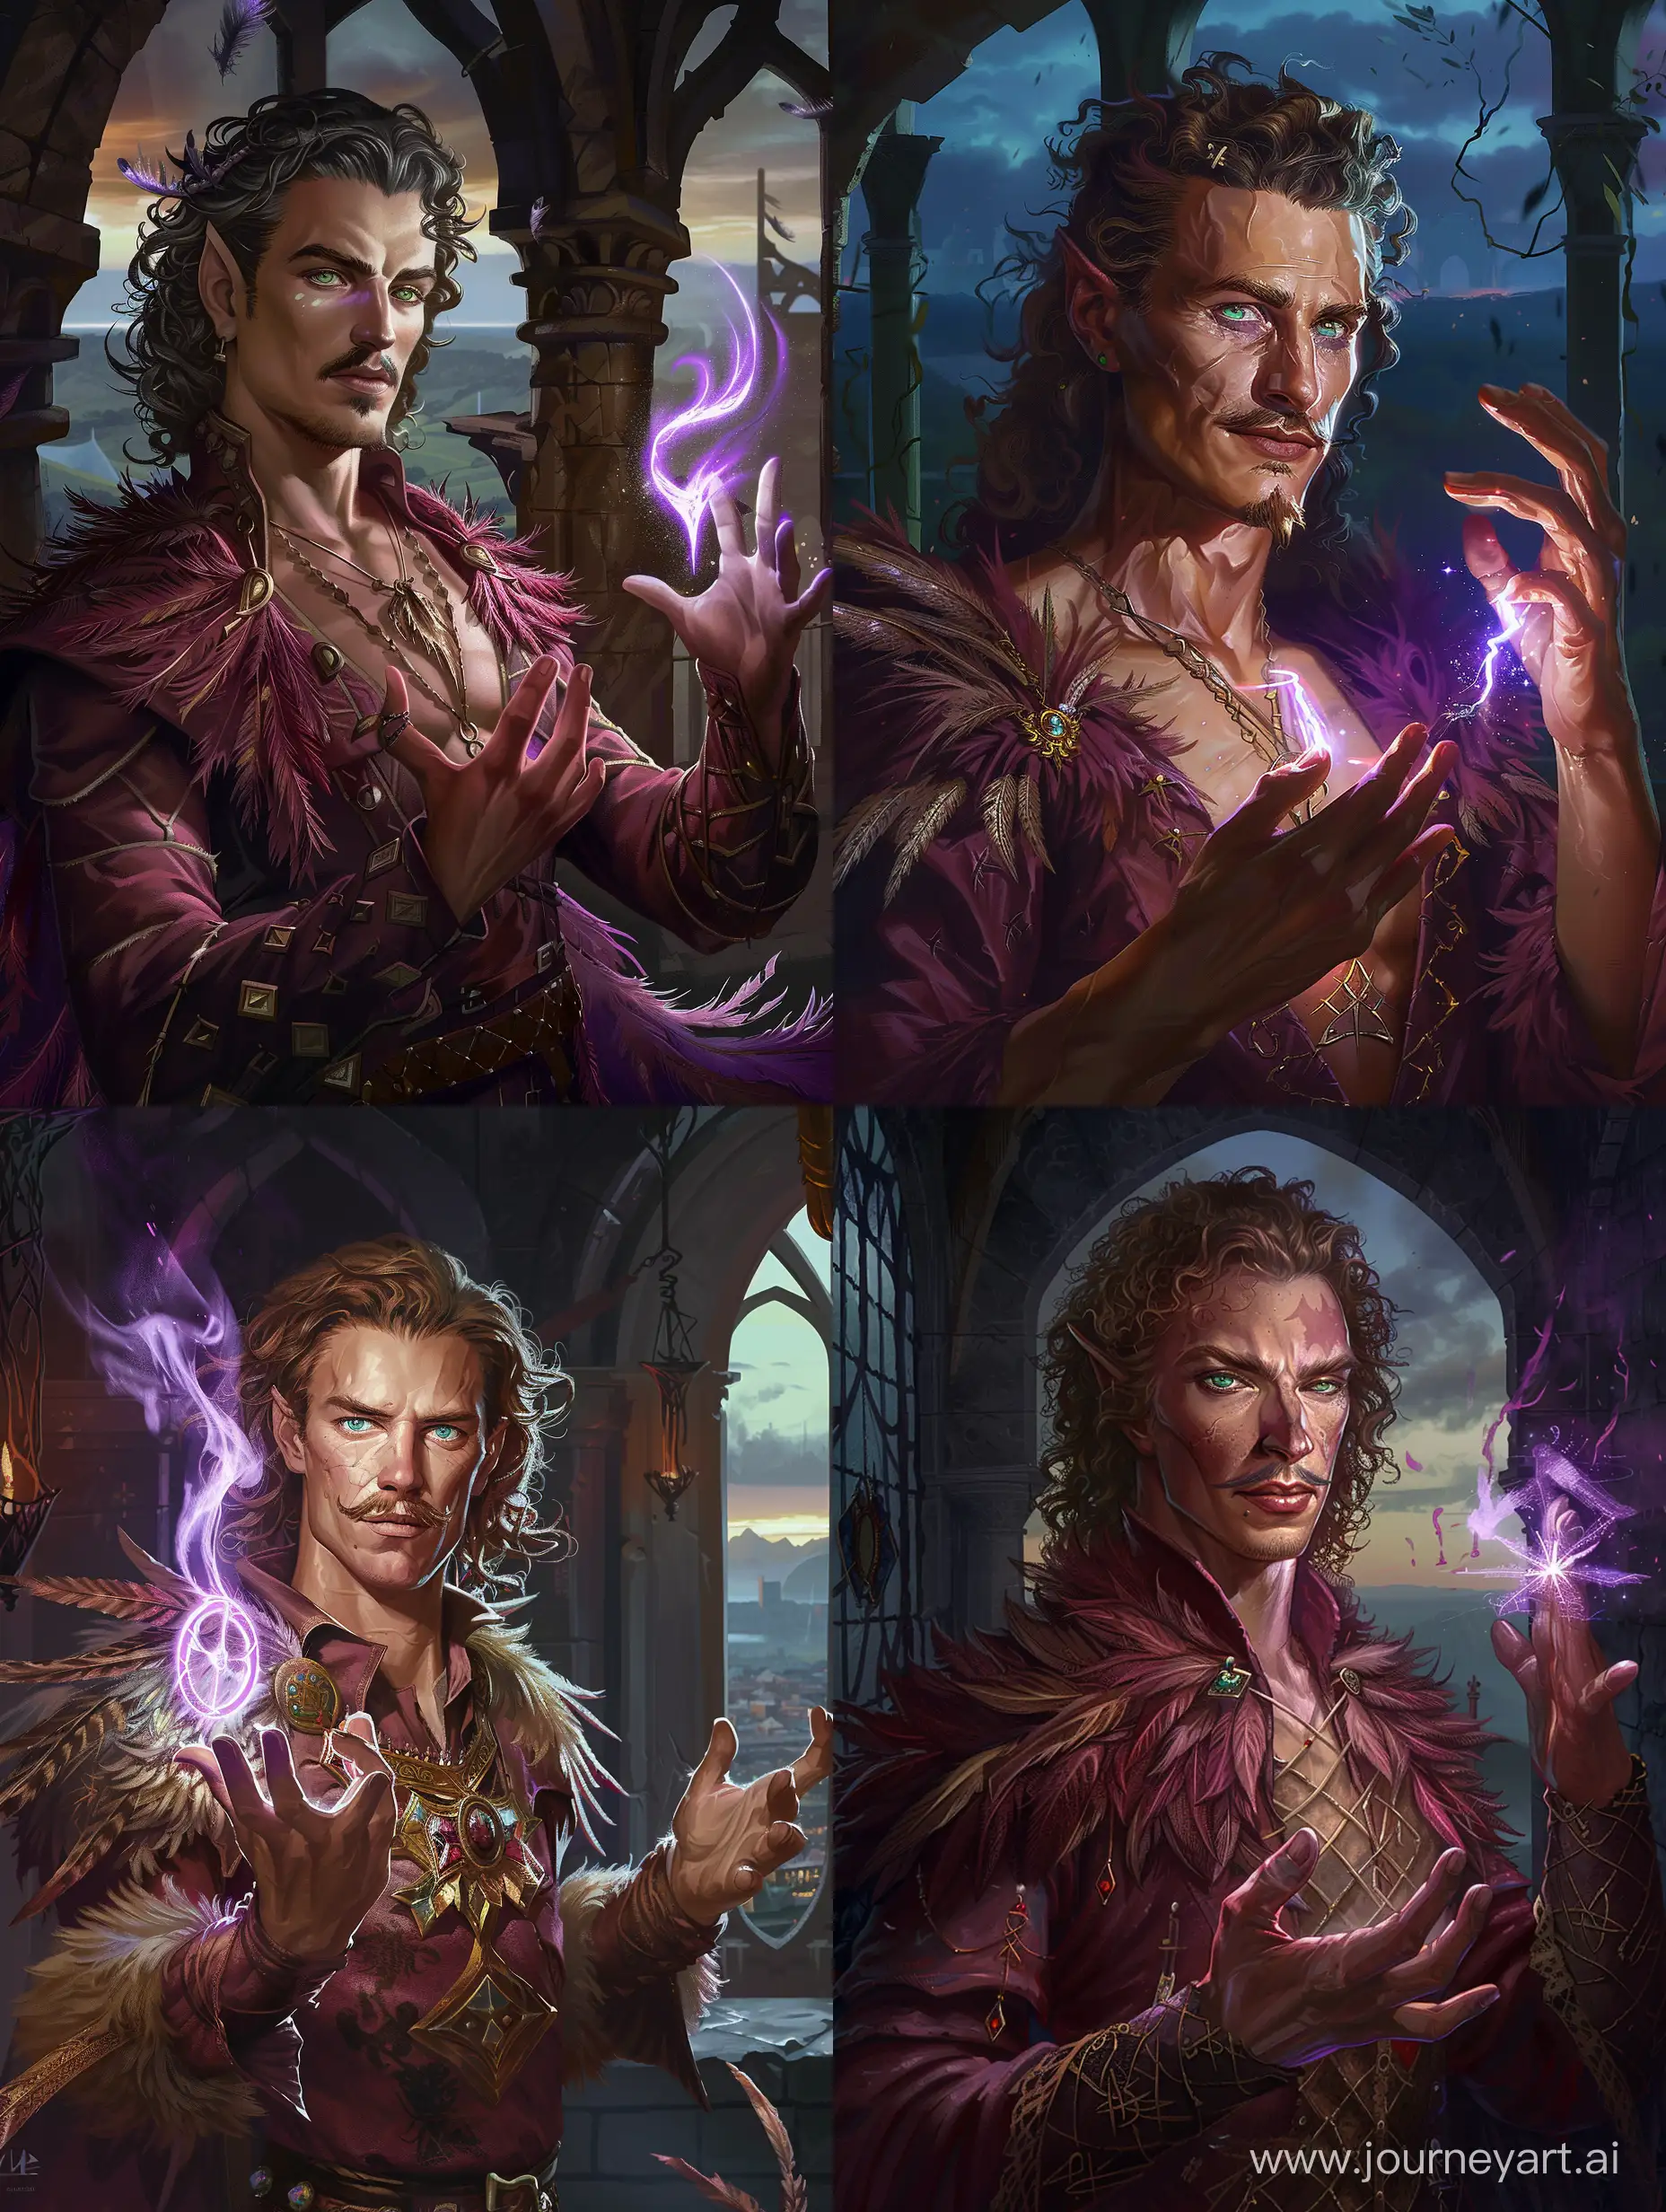 Sarcastic-Slavic-Male-Sorcerer-Conjuring-Purple-Rune-in-Wizard-Tower-at-Night